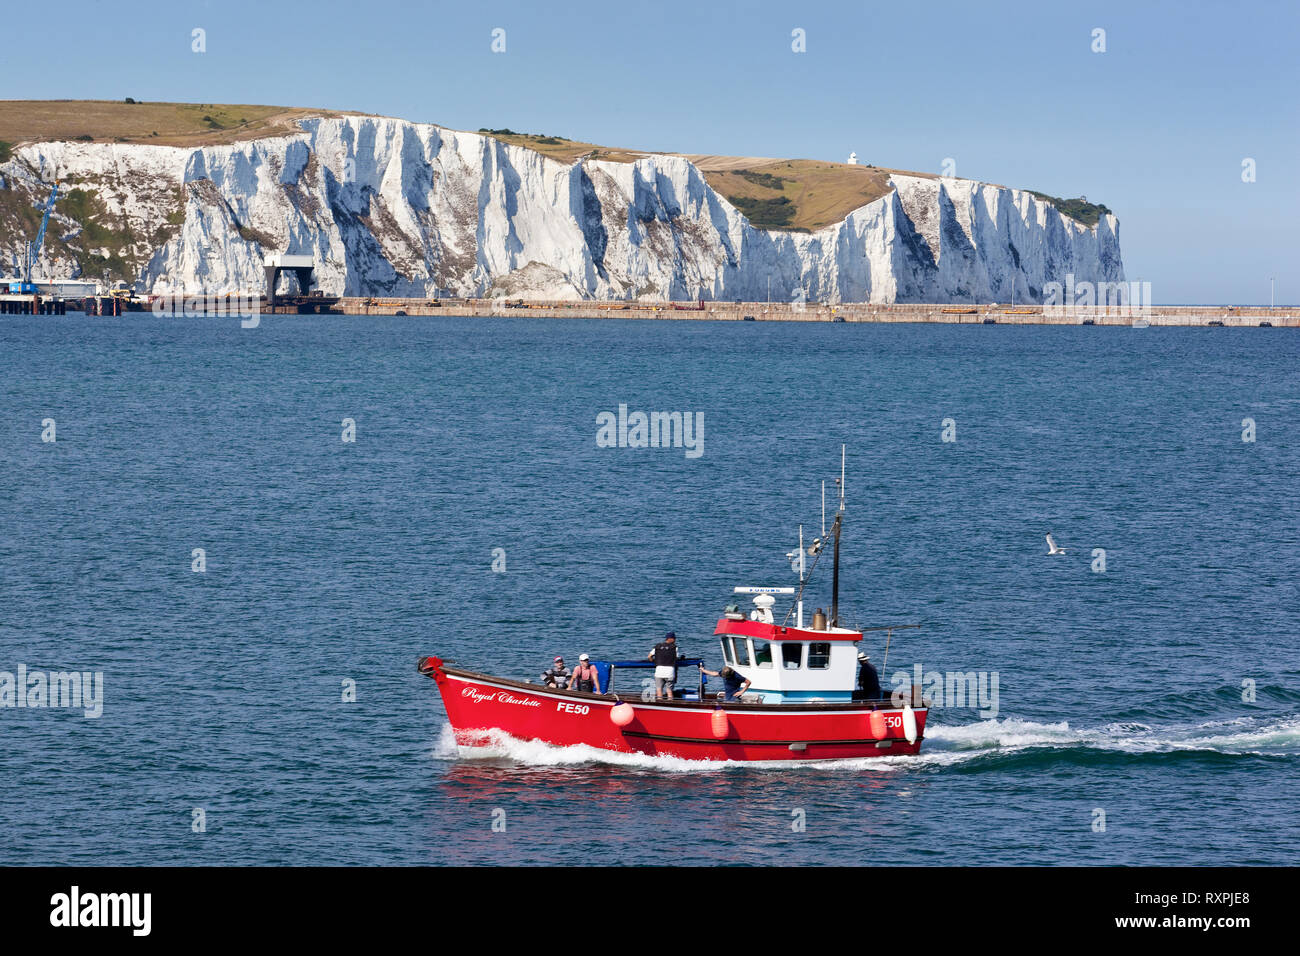 Famous white cliffs of Dover while, in the foreground, is a charter boat returning to the city's harbour. Dover, United Kingdom Stock Photo